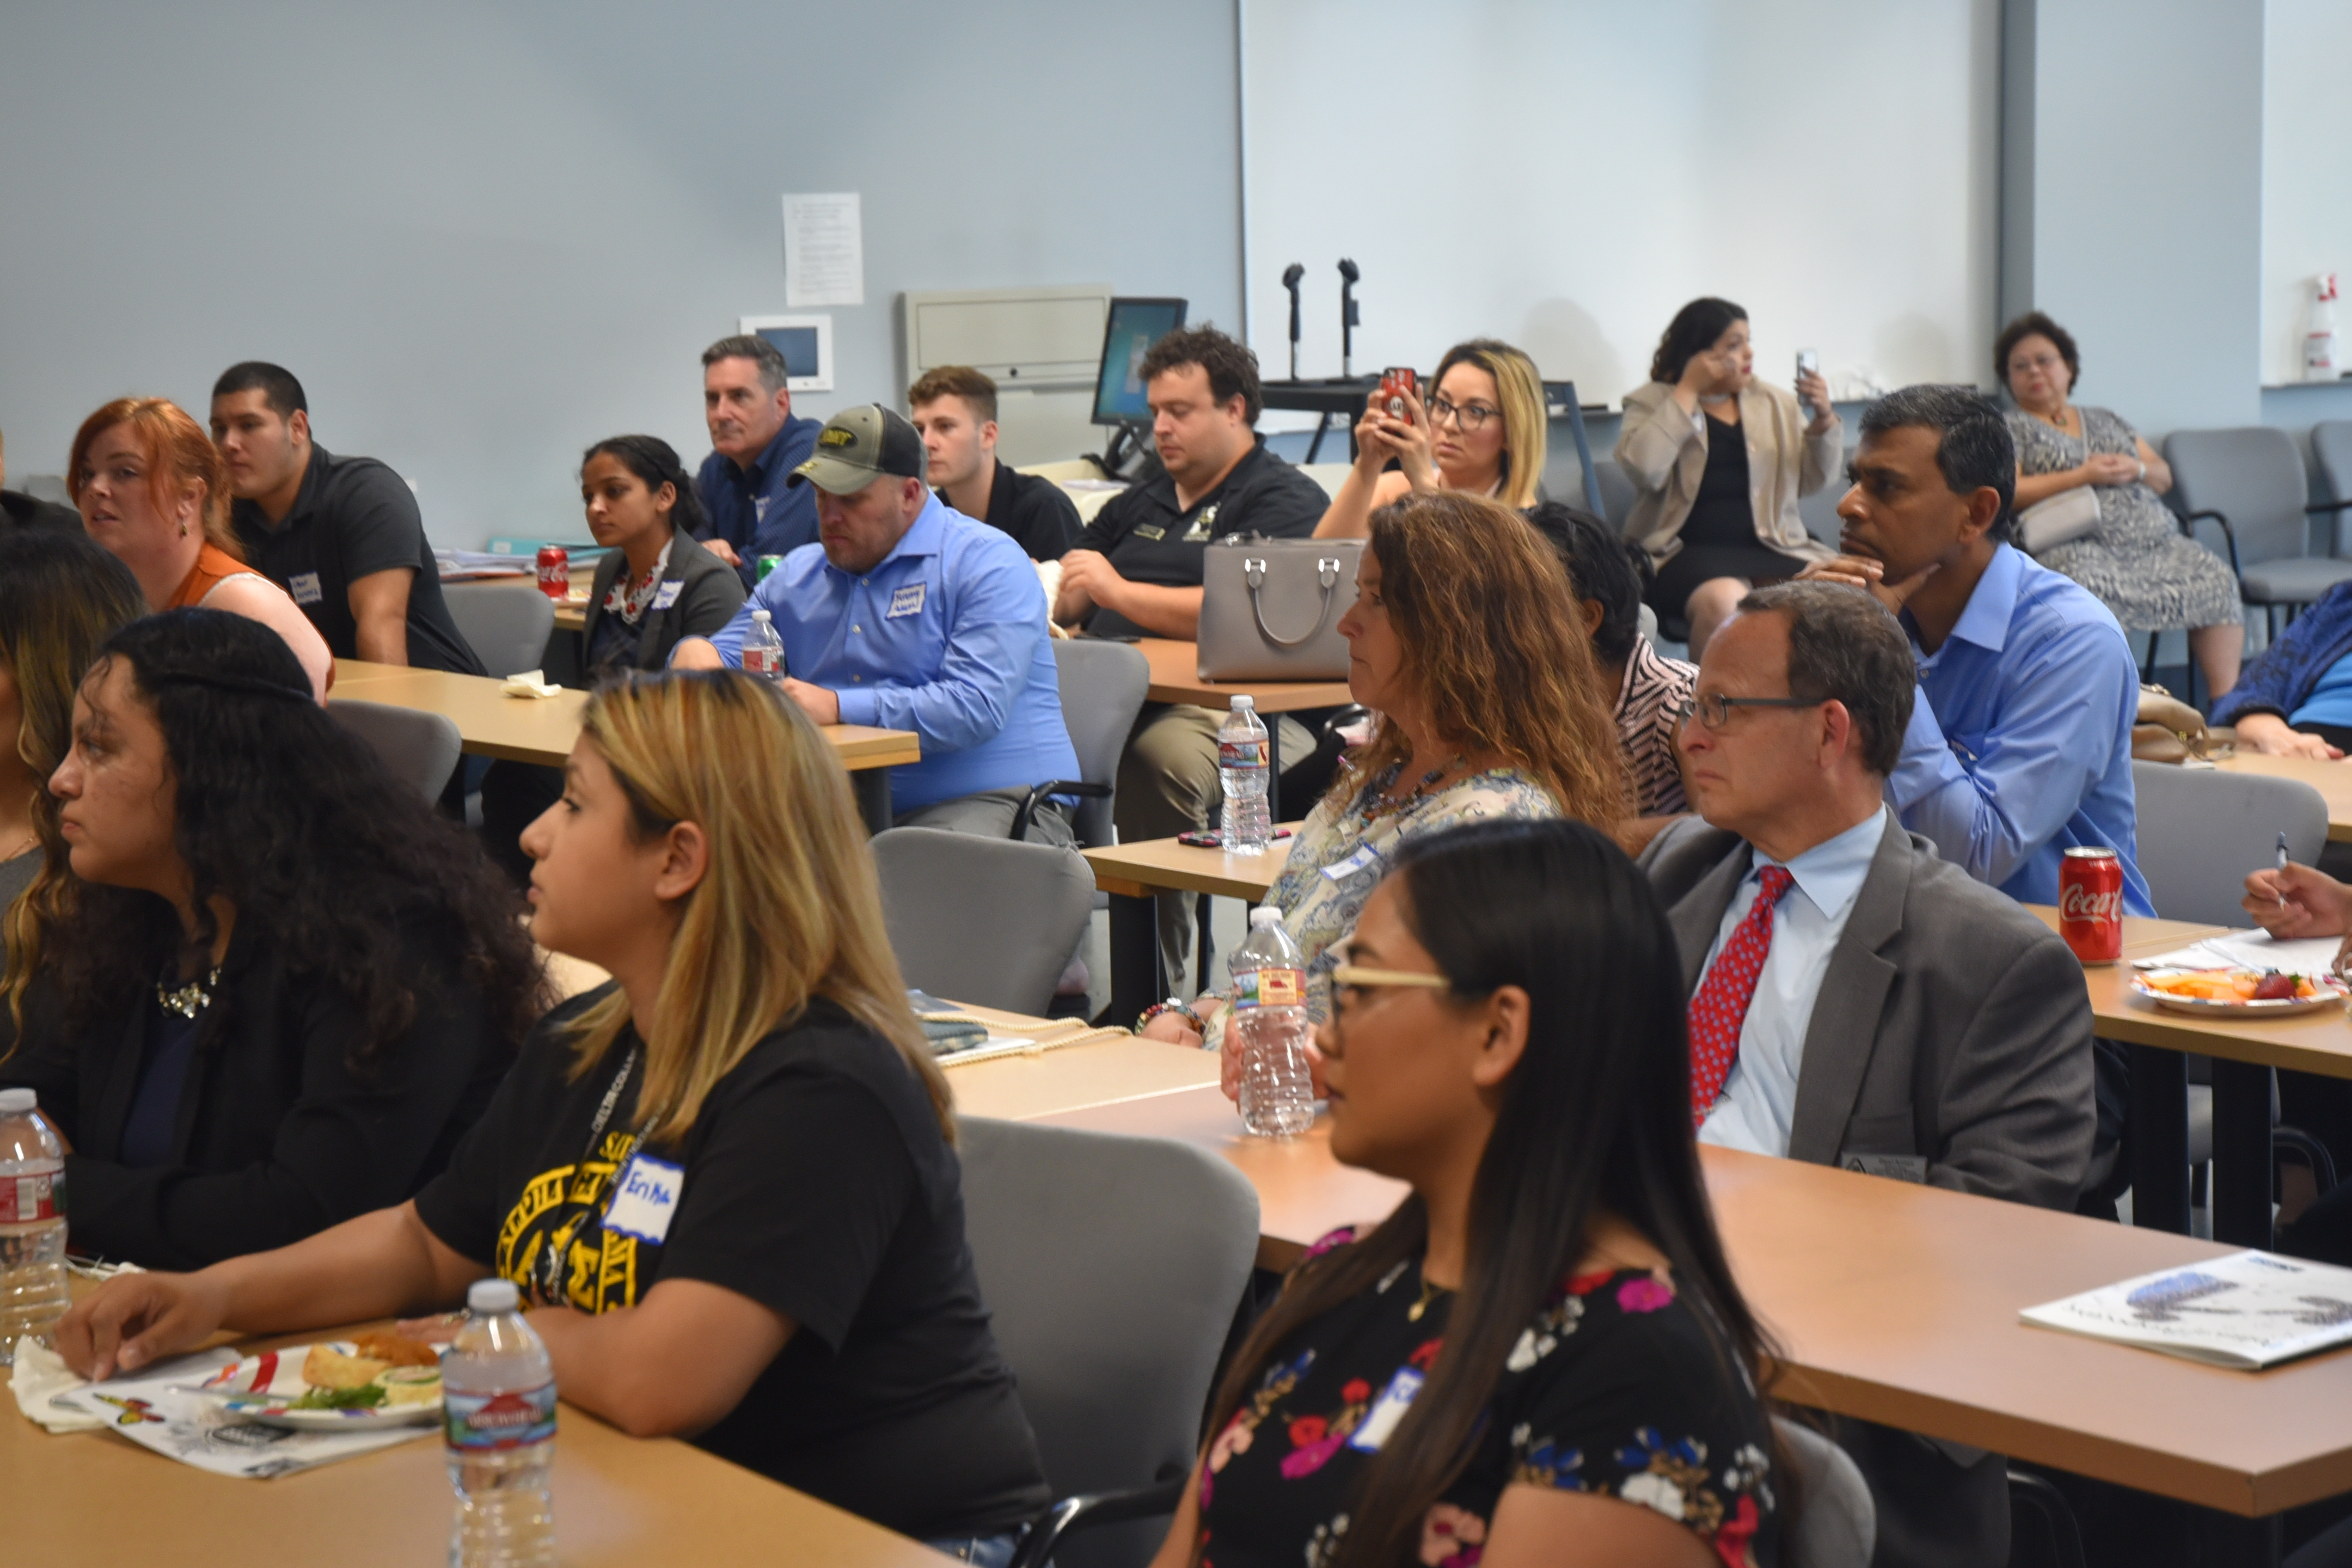 Students and members of the public listen during the first-ever Alumni Night and Political Meet and Greet on April 25 at San Joaquin Delta College.